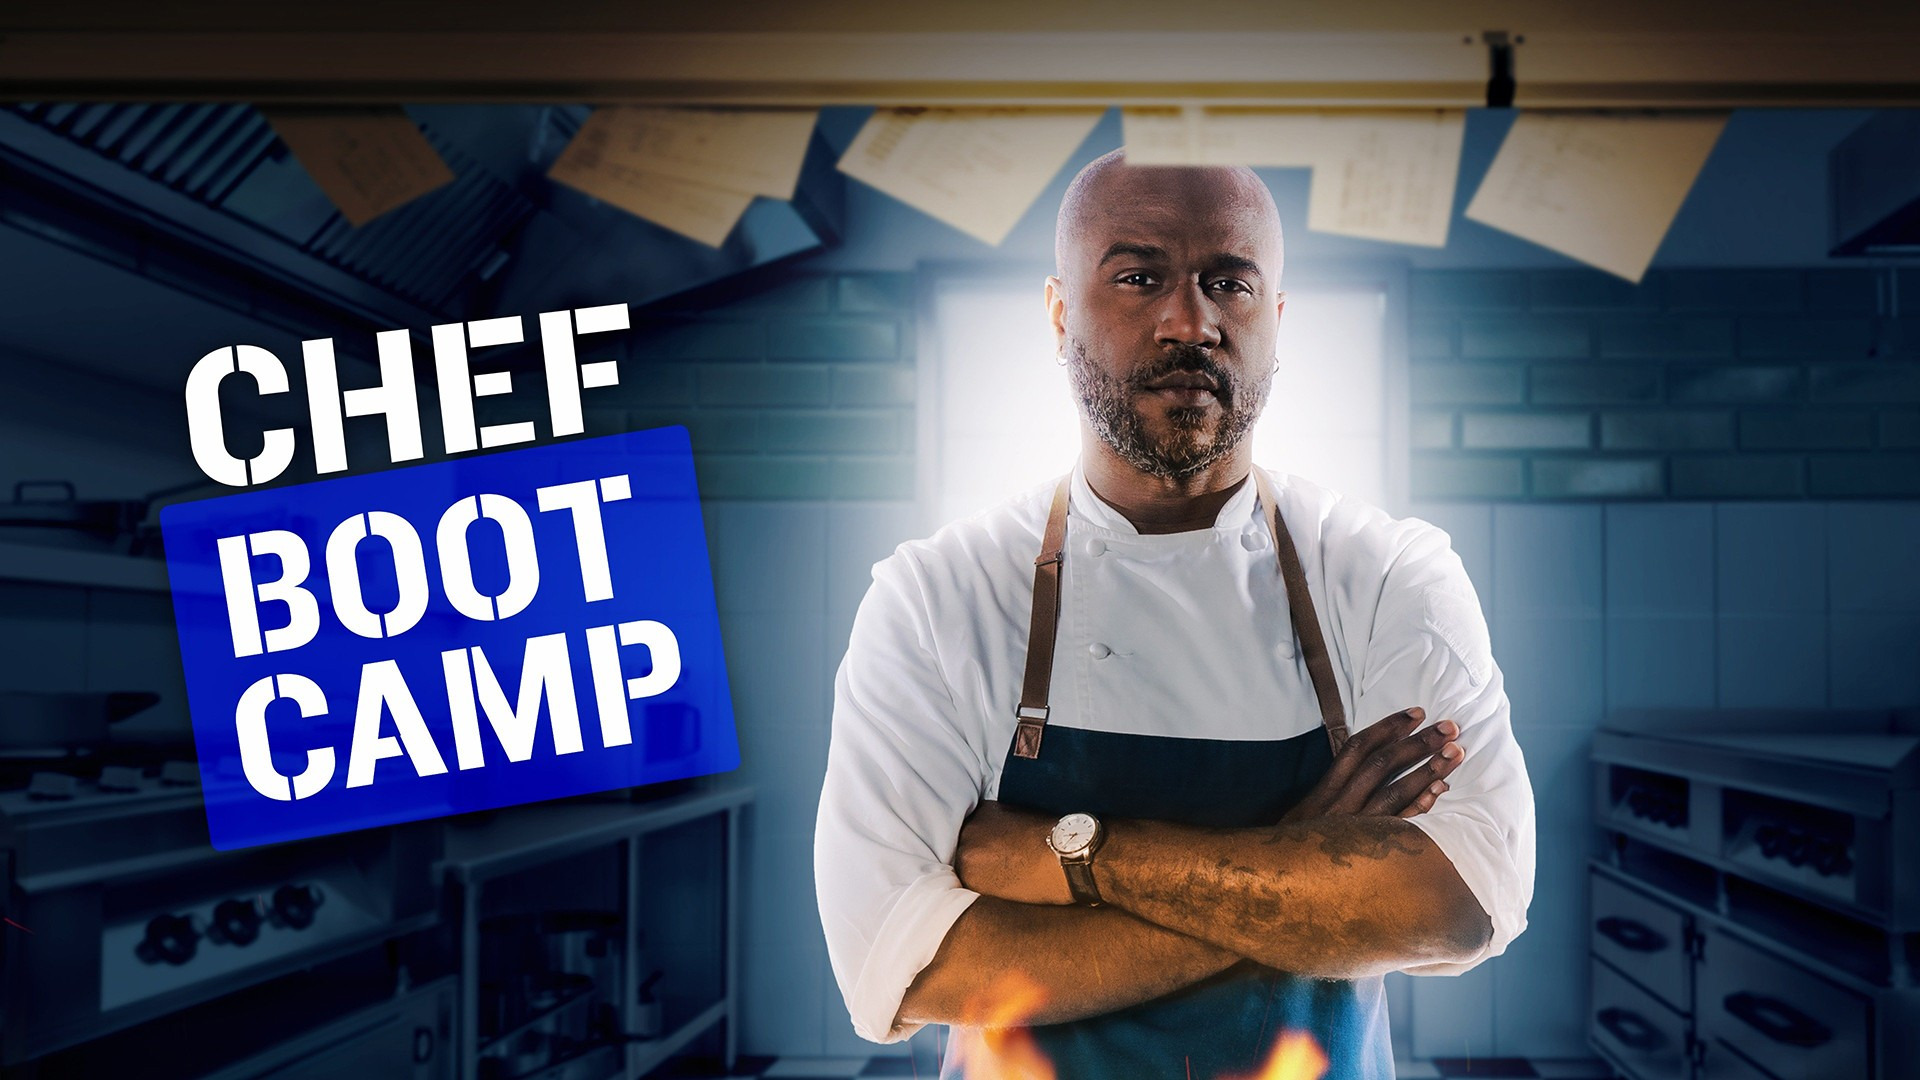 Show Chef Boot Camp